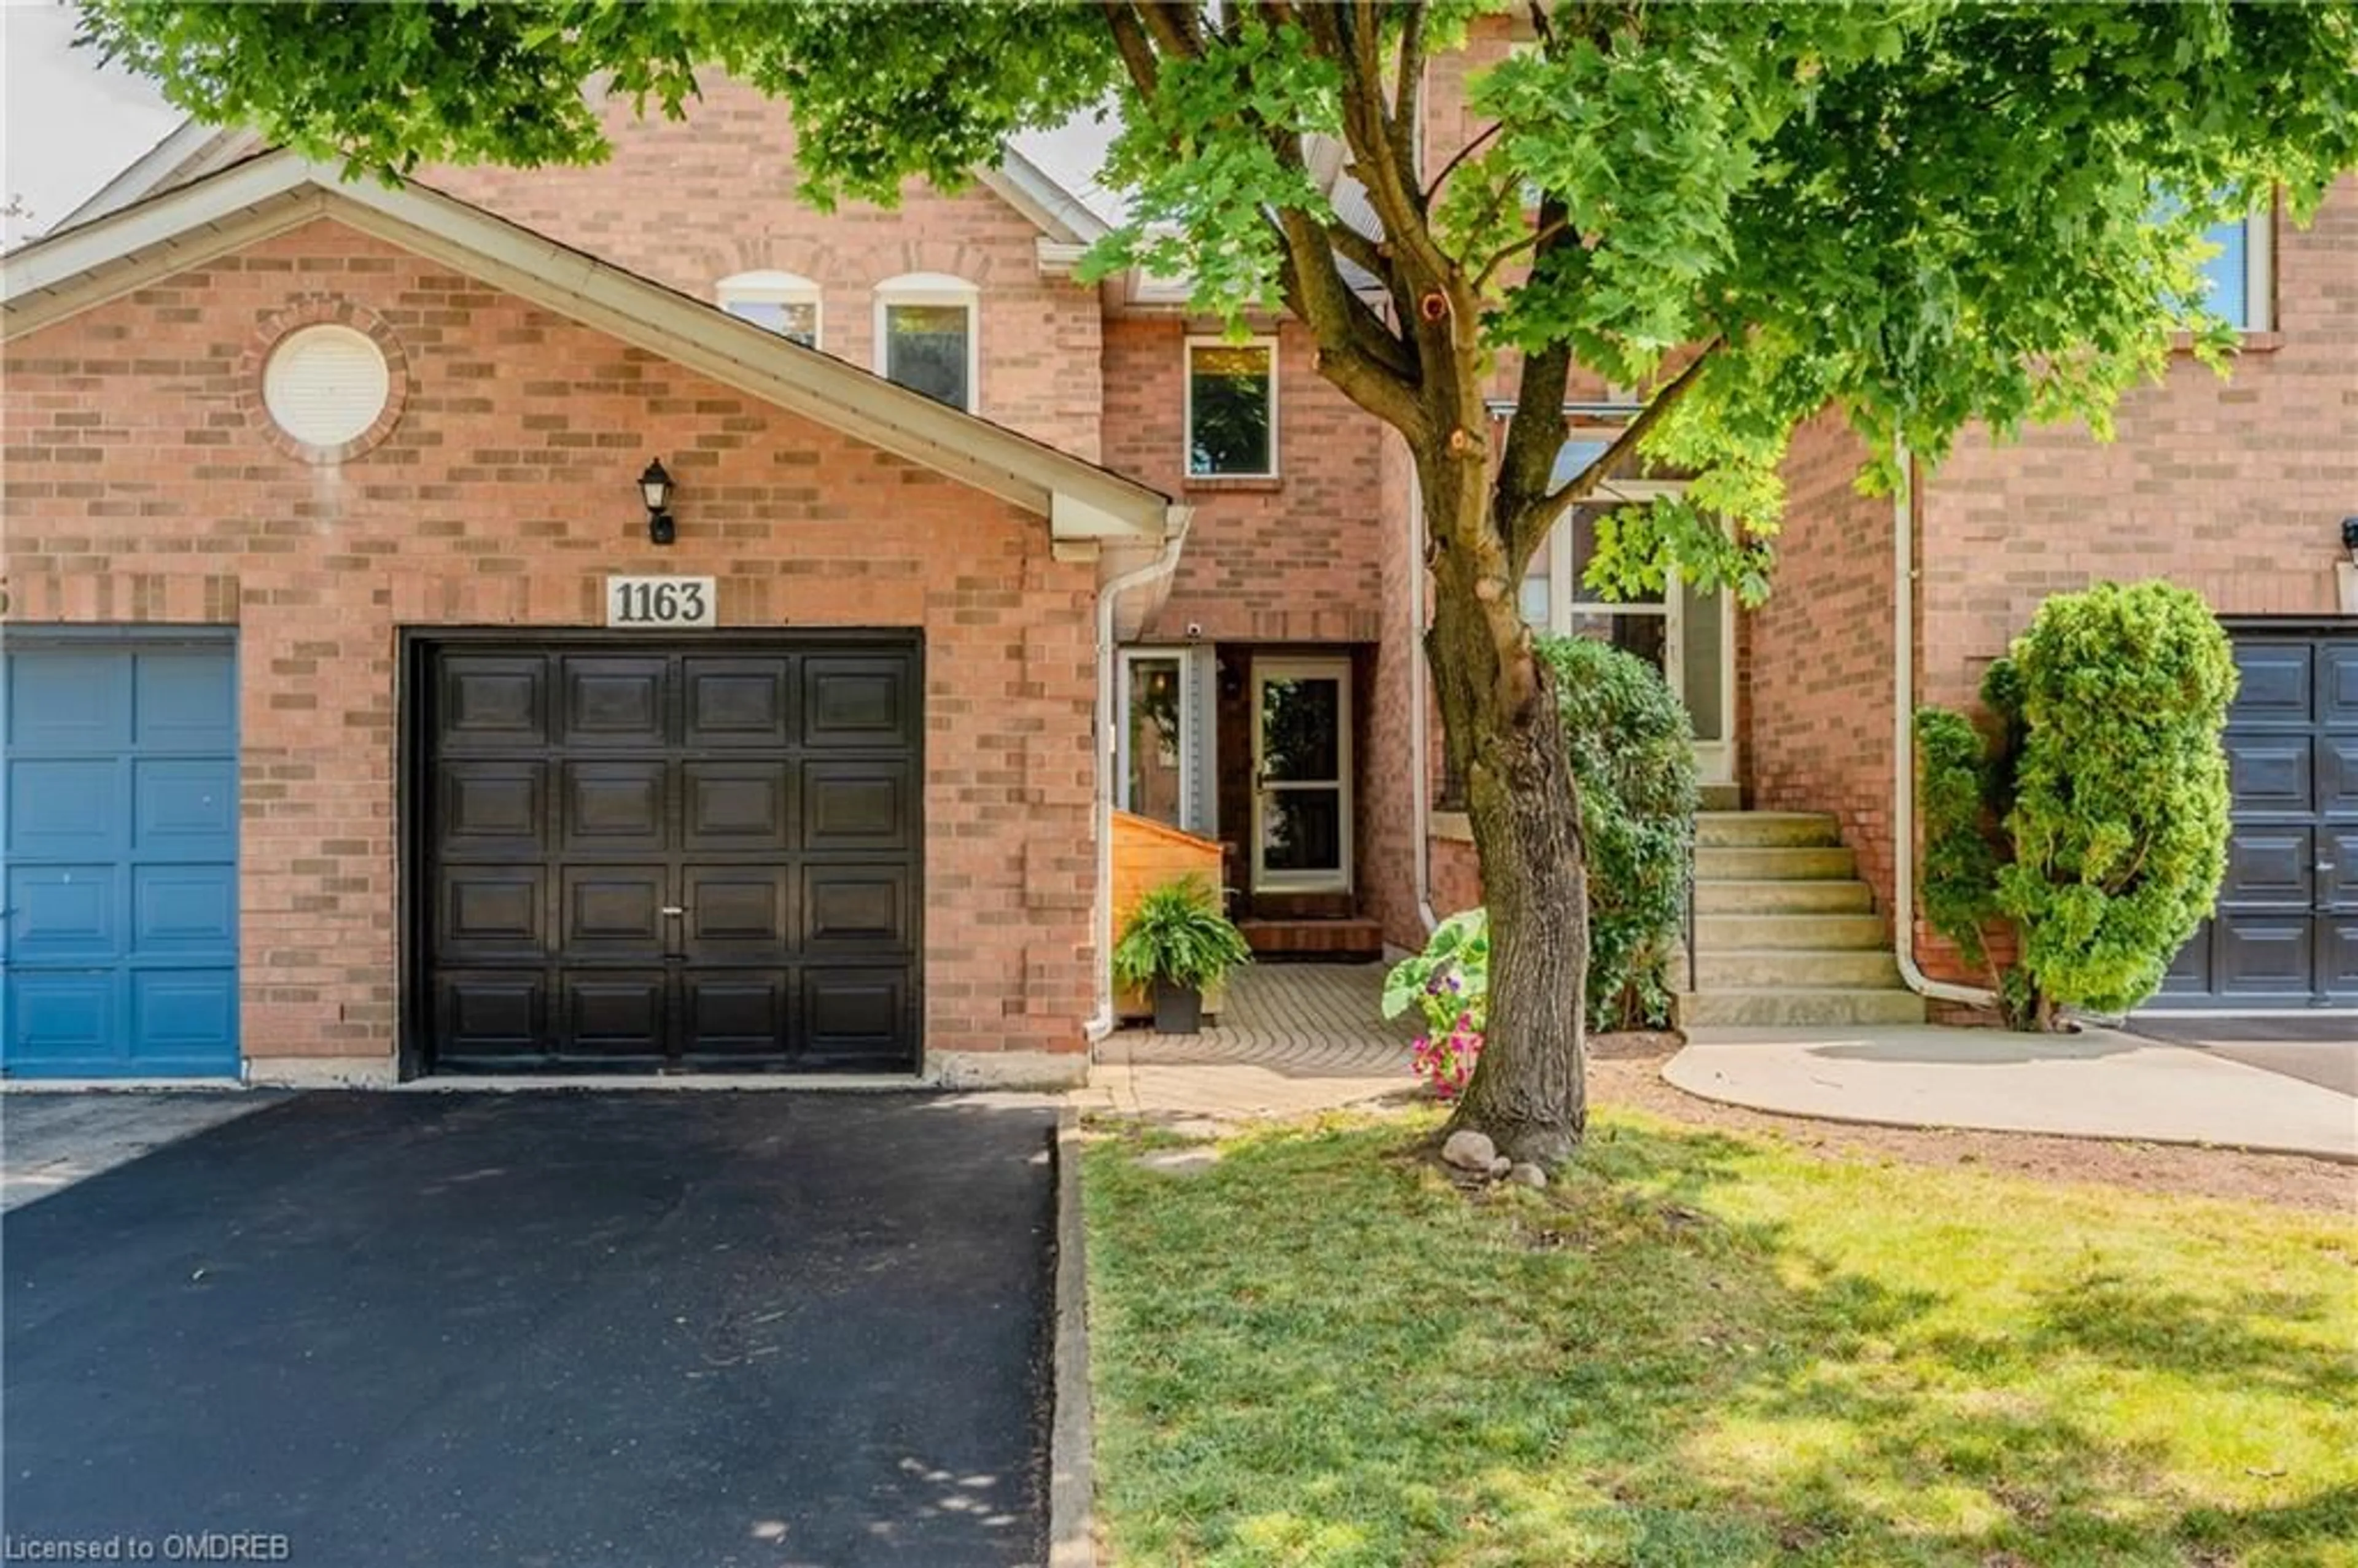 Home with brick exterior material for 1163 Leewood Dr, Oakville Ontario L6M 3B9